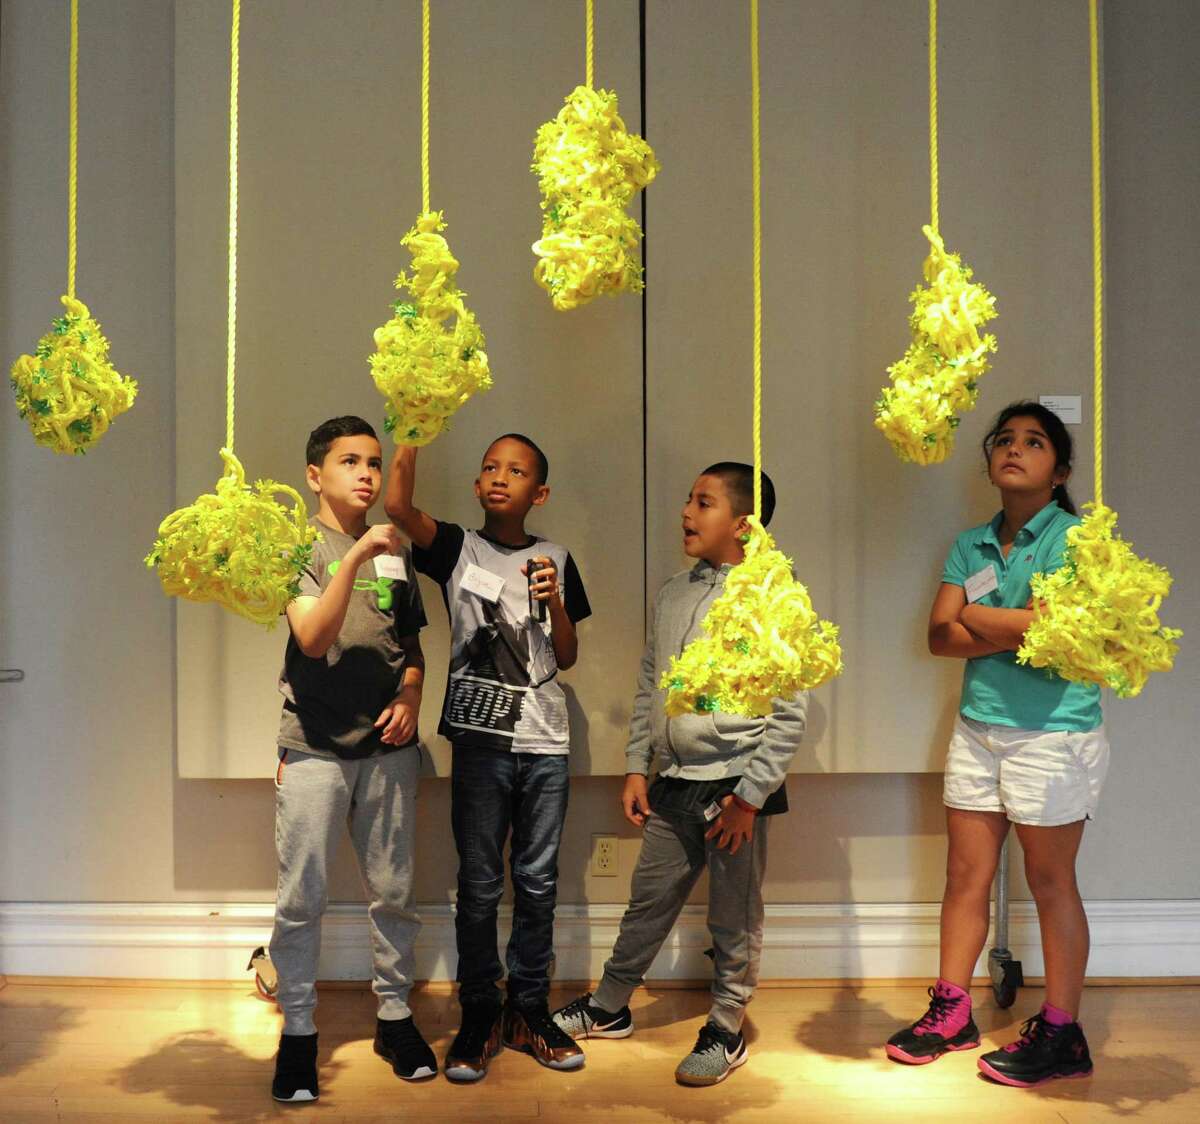 New Lebanon School fourth-graders, from left, Anthony Goncalves, Bryce Seward, Alexis Sarango, and Fransheska Rojas look at Eve Suter's piece "Ropes Cloud (1-7)" as part of the Youth@Art program at the Greenwich Arts Council's Bendheim Gallery in Greenwich, Conn. Wednesday, Oct. 25, 2017. The Bendheim Gallery's exhibition "Flower Stories" featuring contemporary artists' perception of flowers in a variety of mediums will run through Nov. 15.